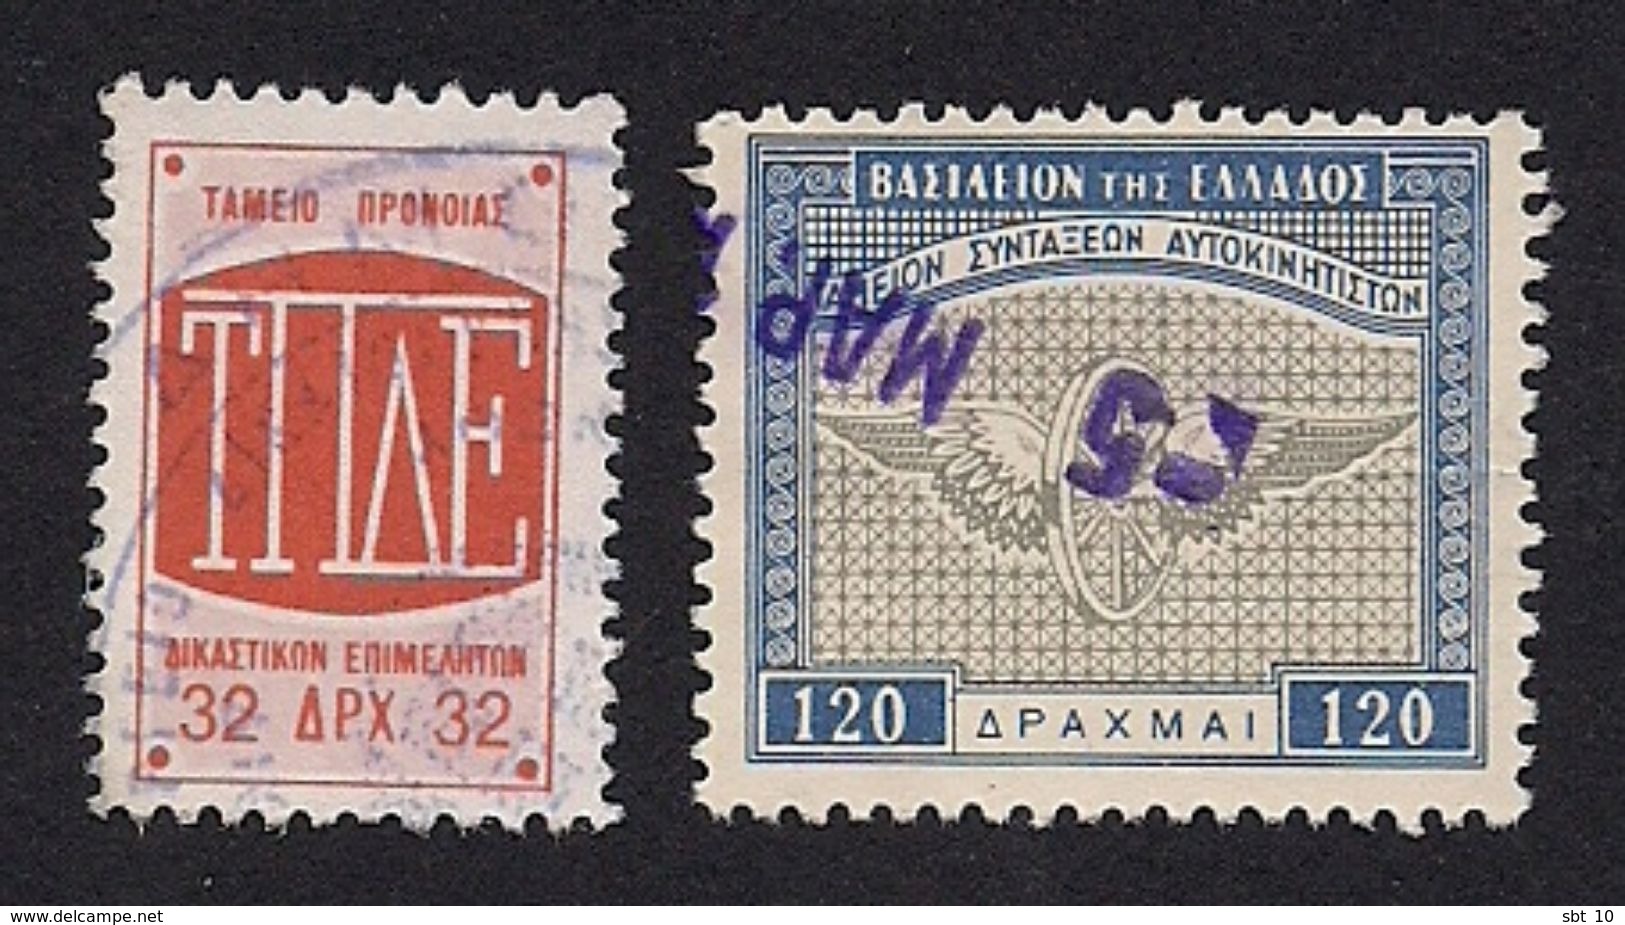 Greece Revenue 2 Stamps - Providence Fund Of Bailiffs 32 Dr - PENSION FUND Of Motorists (T.S.A.) 120 Dr - Used - Revenue Stamps